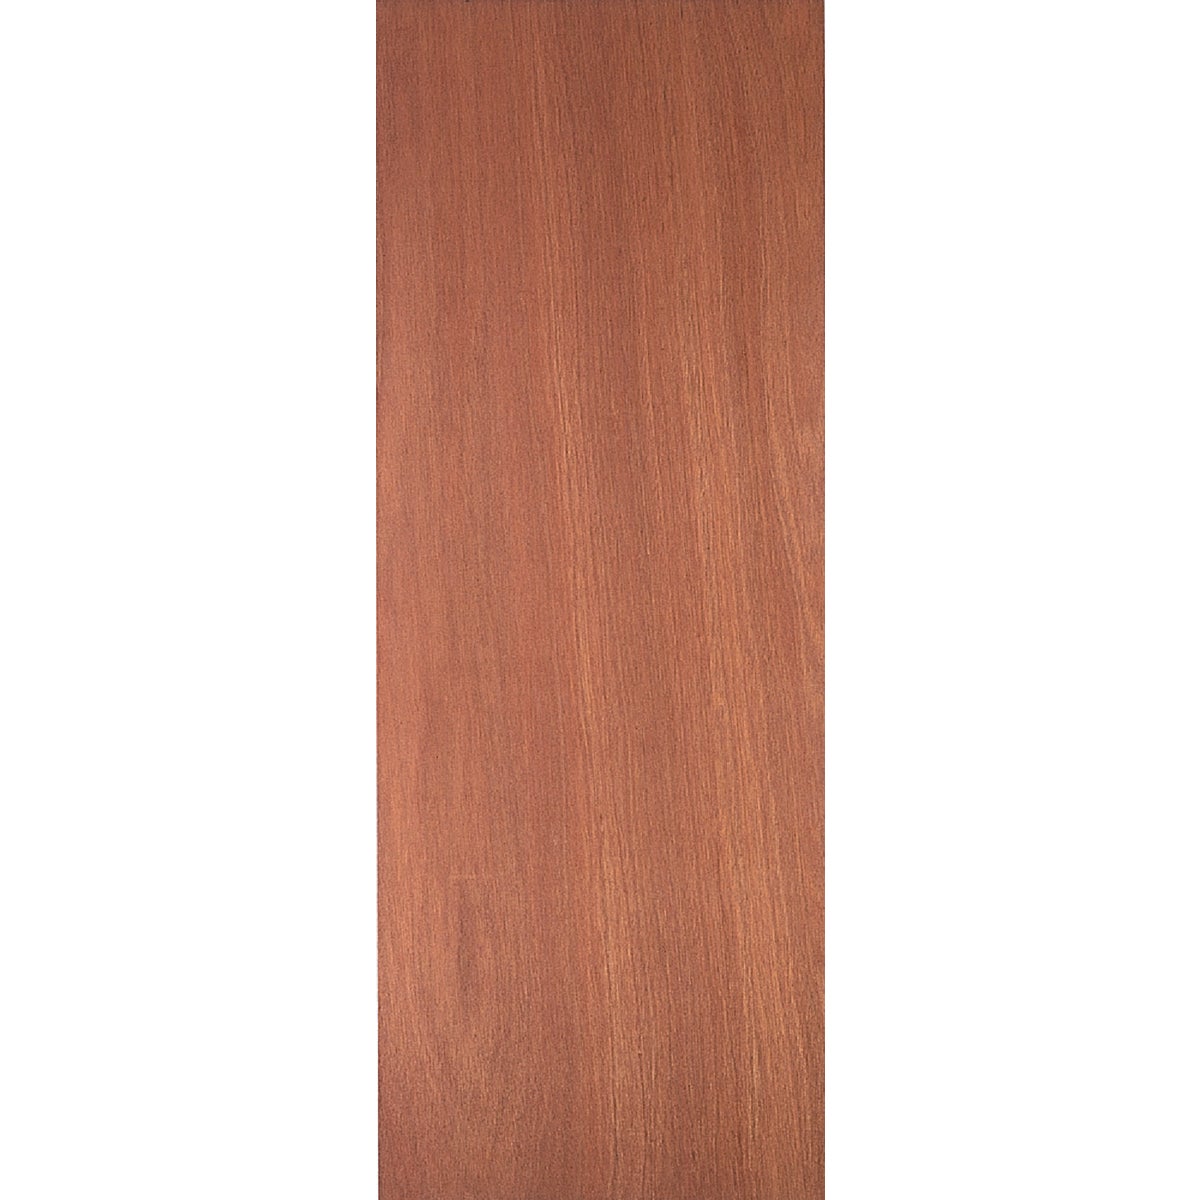 Item 161540, Full and square edge lauan door slabs have finger jointed stiles, and fiber